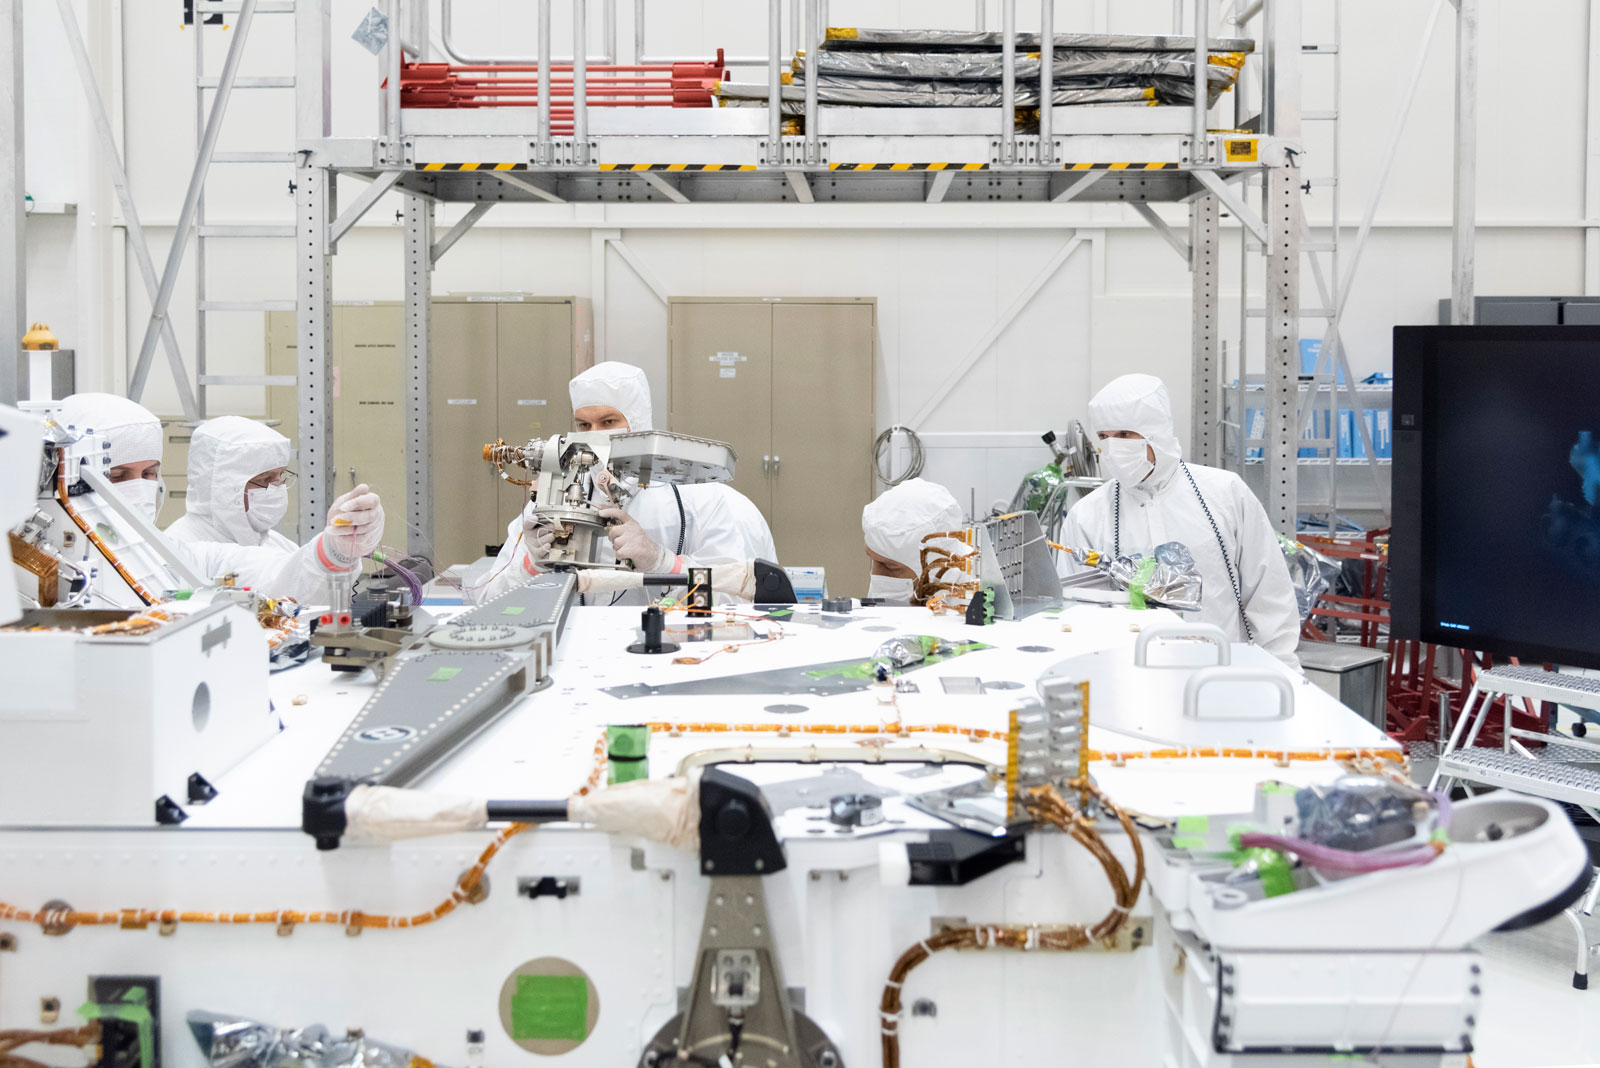 Mars 2020 engineers and technicians installed the high-gain antenna on the rover's equipment deck in the Spacecraft Assembly Facility's High Bay 1 clean room at JPL.